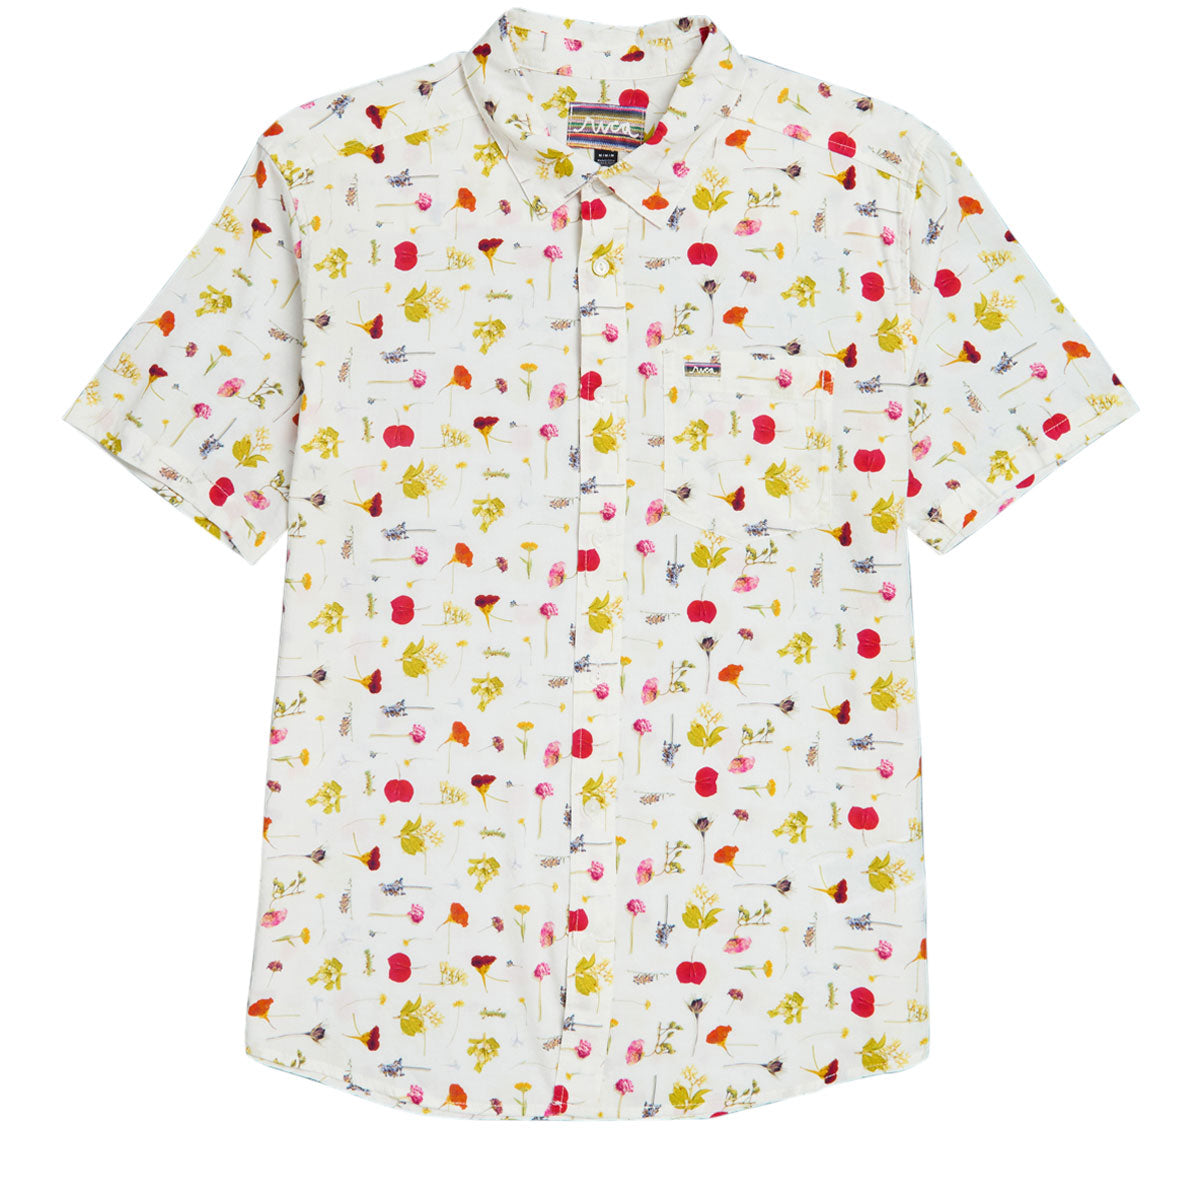 RVCA Oblow Pressed Shirt - White image 1